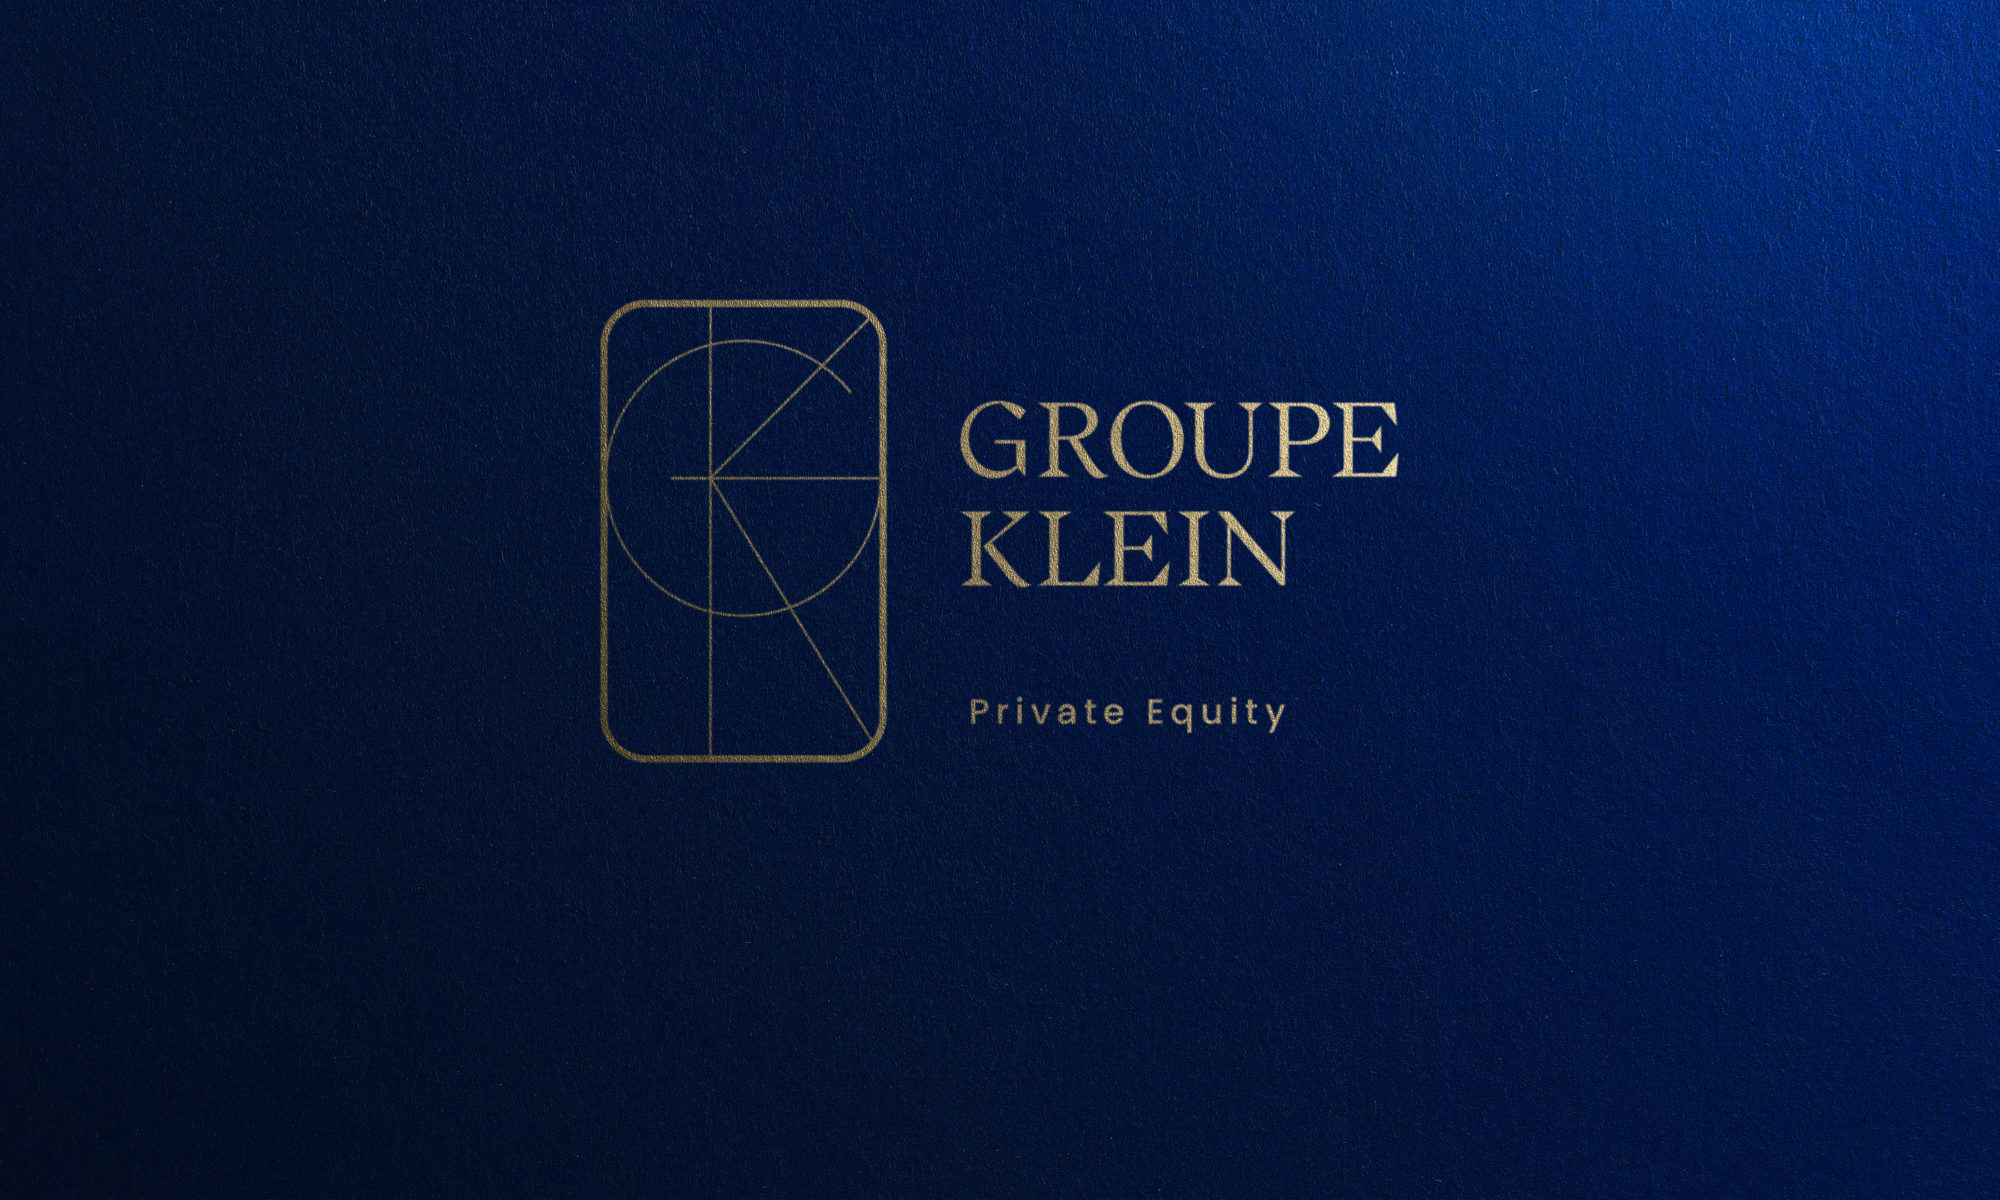 The New Private Equity Company - Switzerland